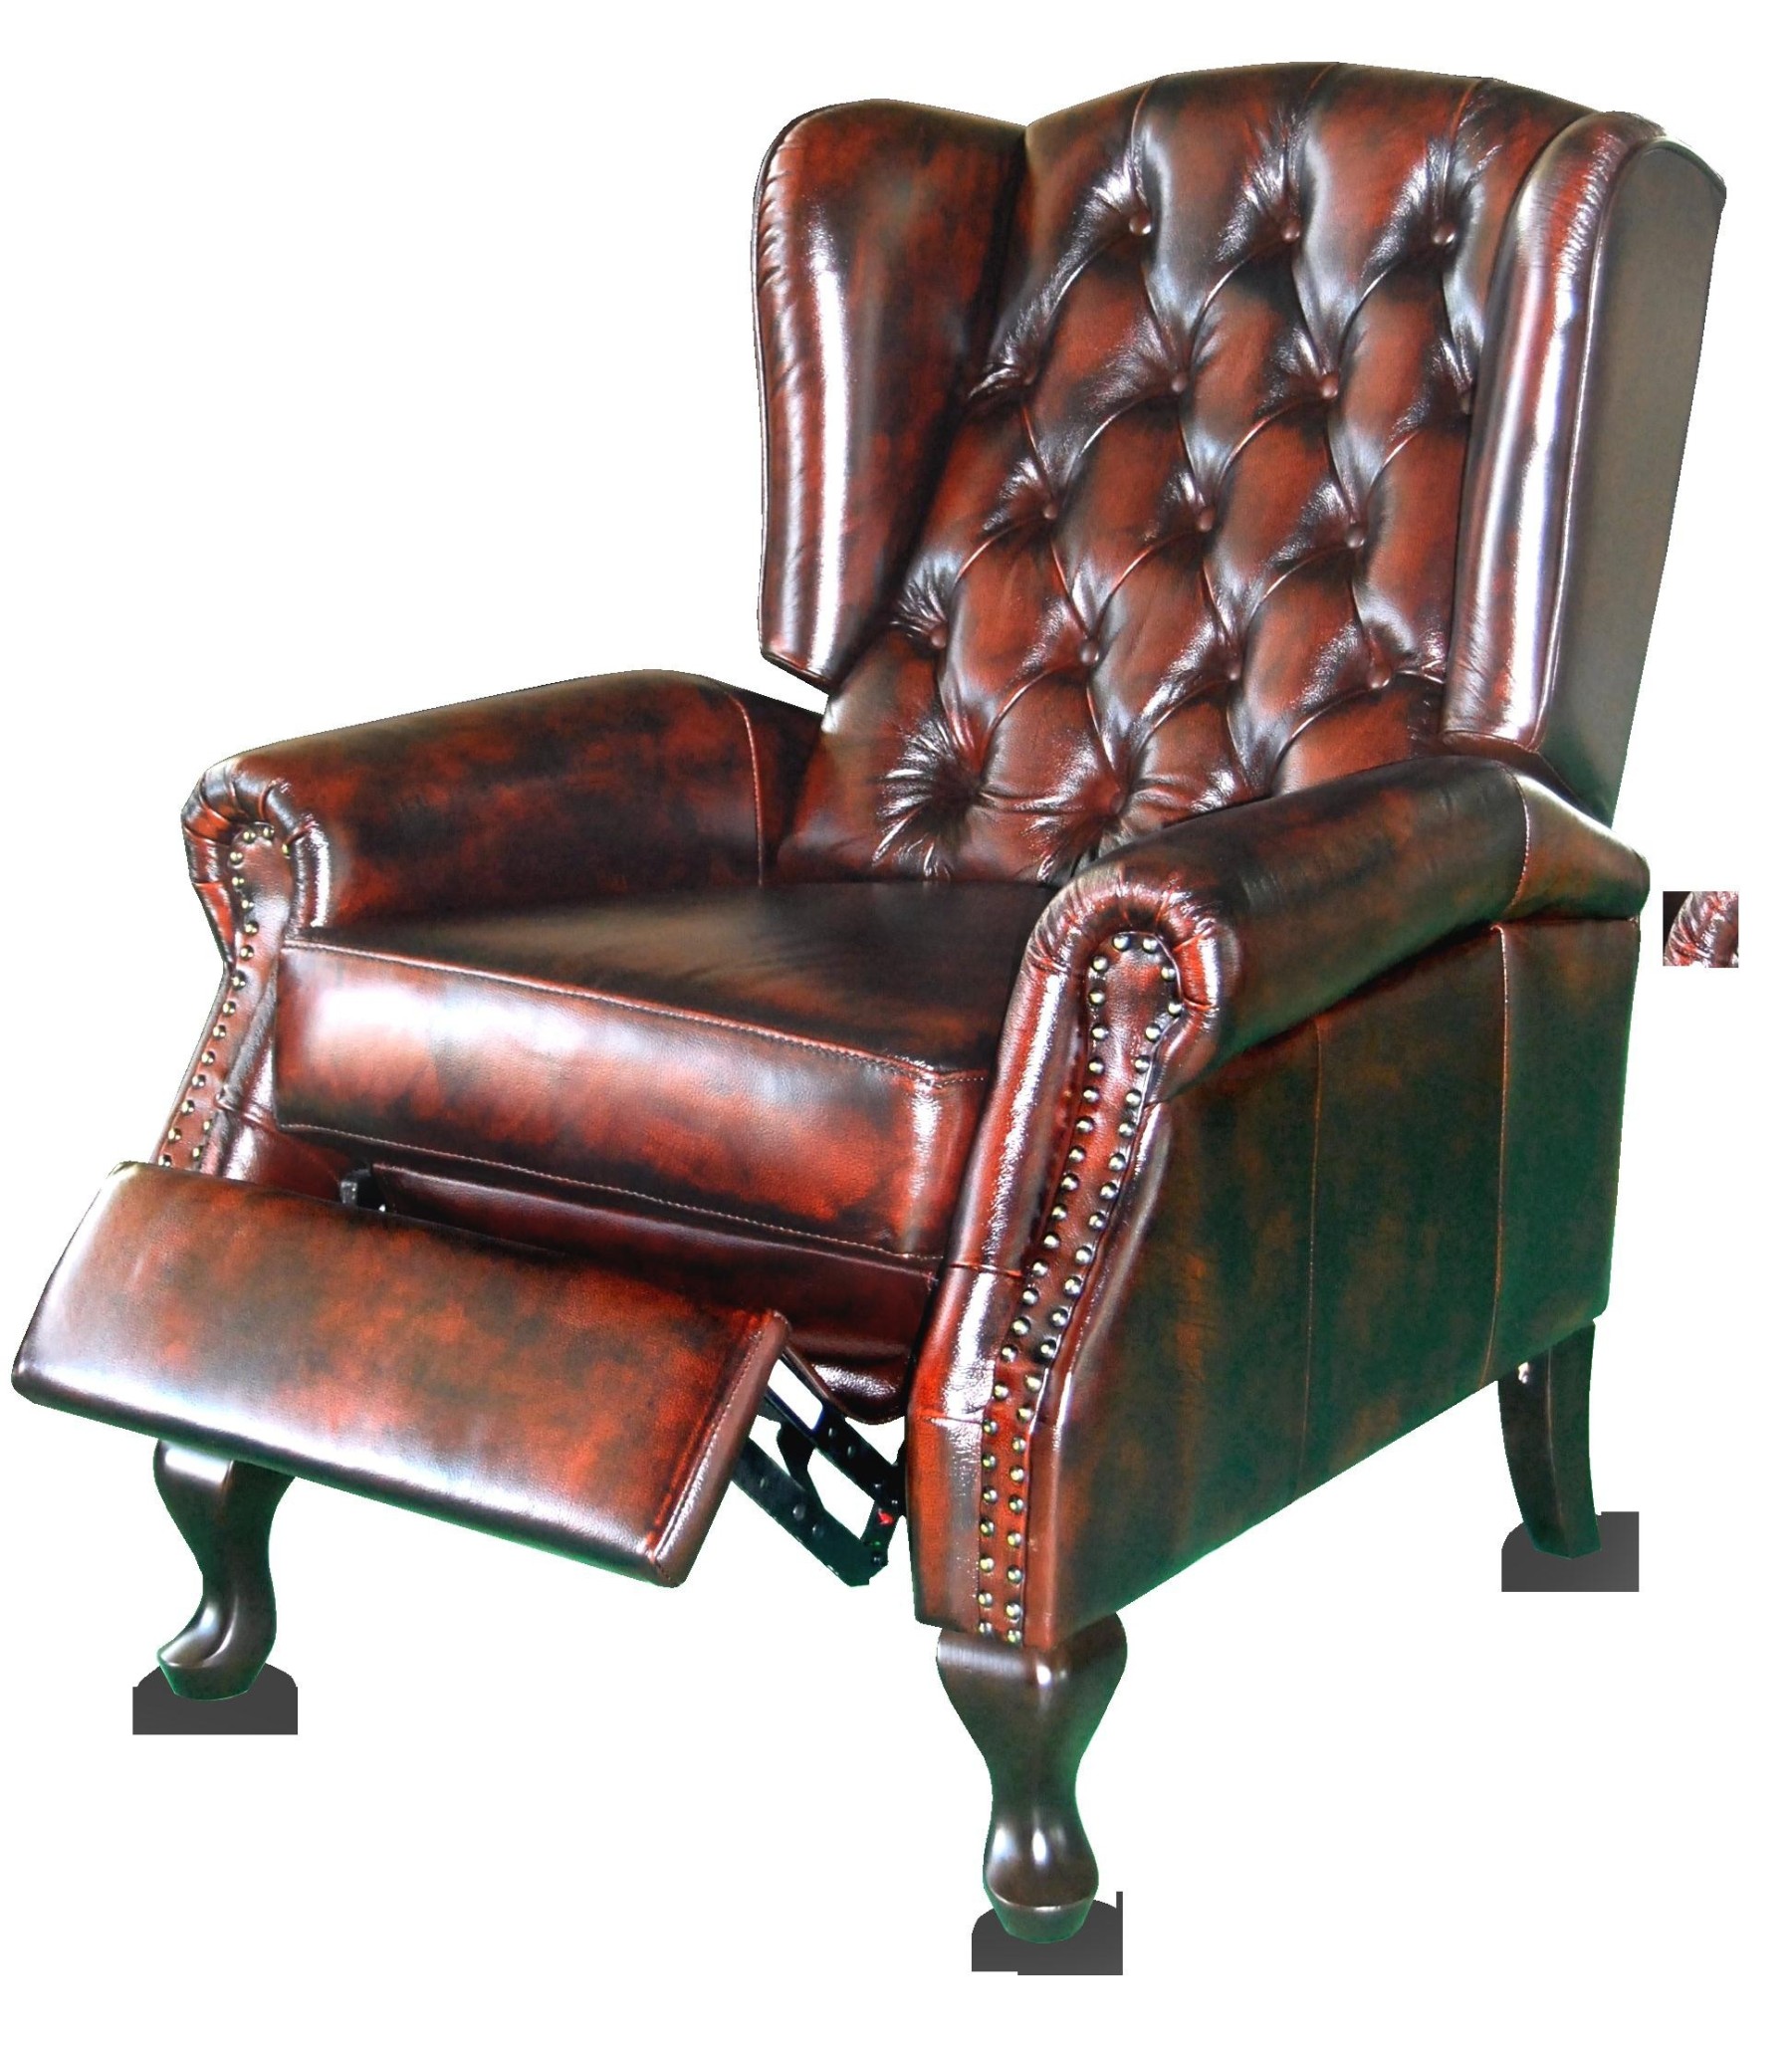 Chesterfield Lounges Chesterfield Sofas Wingback Chairs Wing Back Recliners Chesterfield